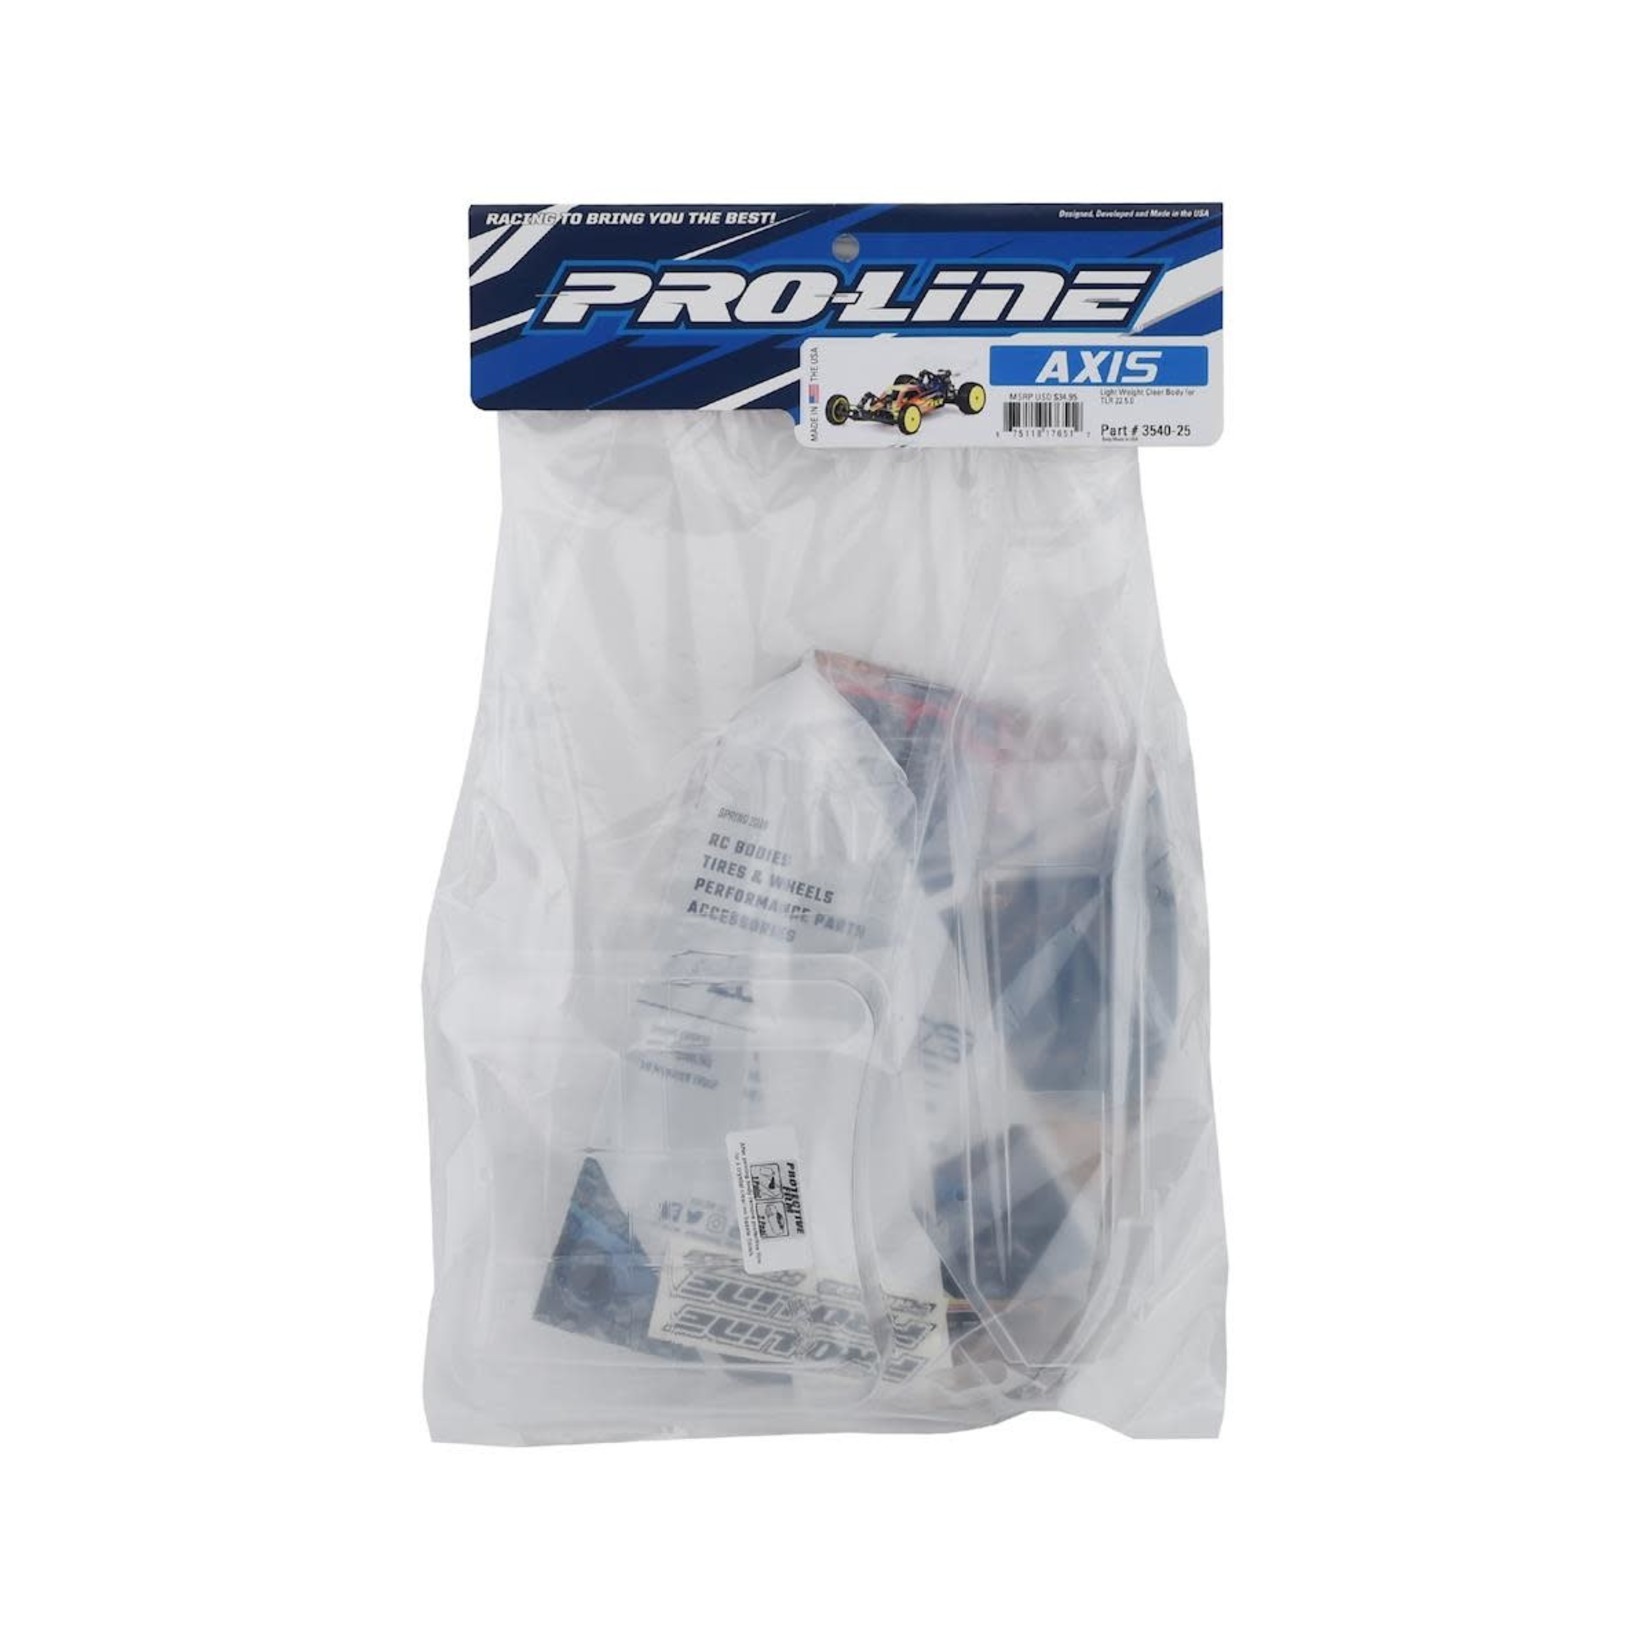 Pro-Line Pro-Line TLR 22 5.0 Axis 2WD 1/10 Buggy Body (Clear) (Lightweight) #3540-25